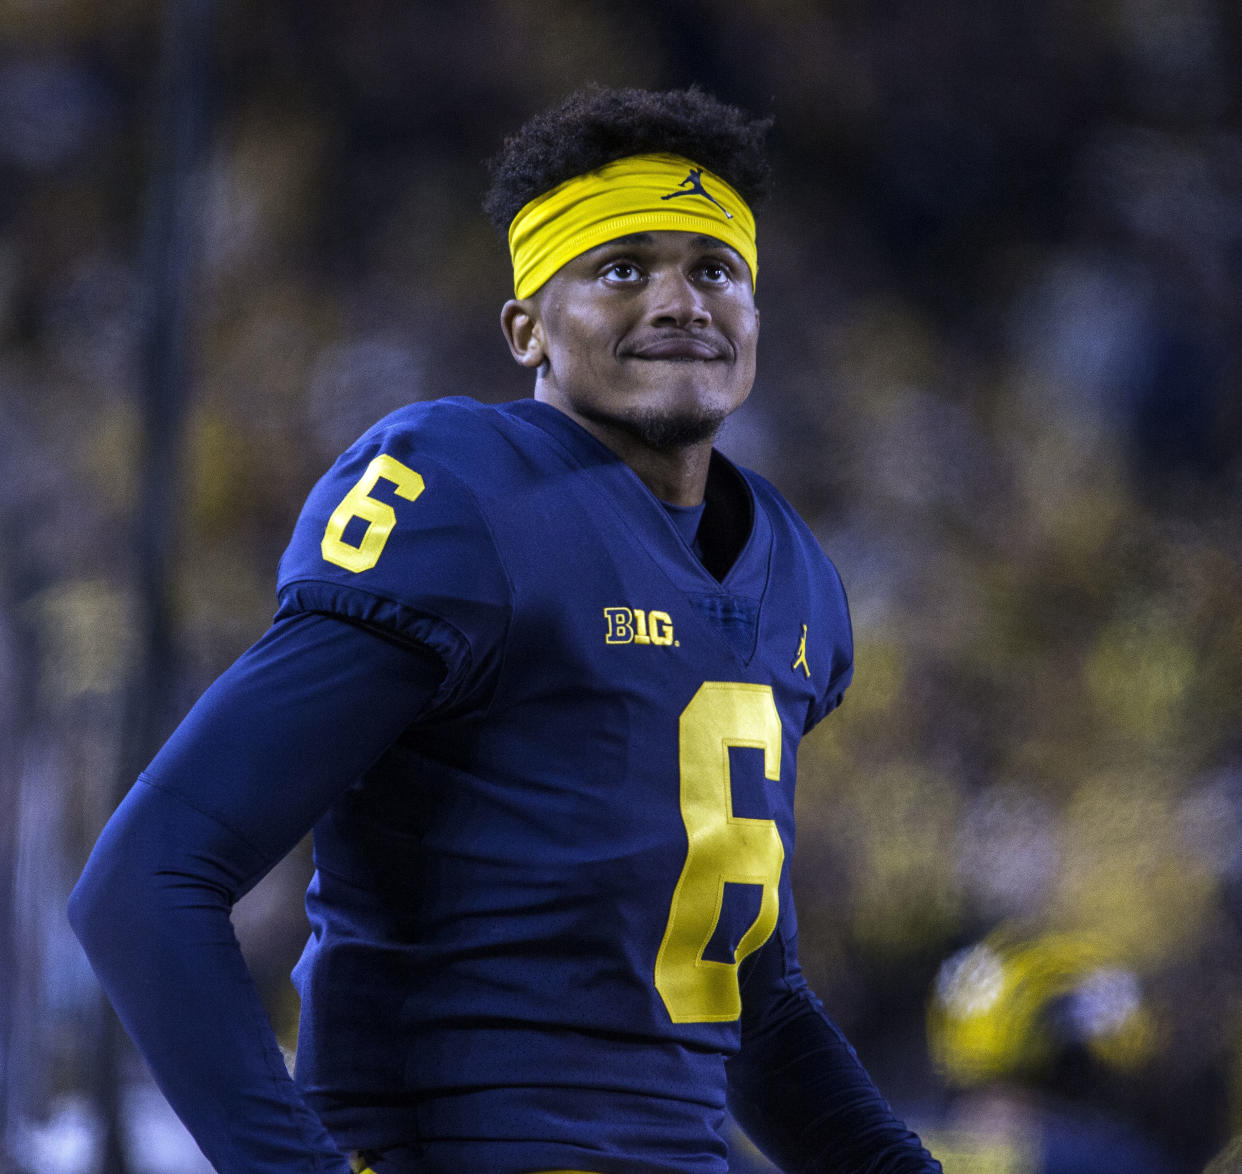 Michigan defensive back Myles Sims (6) sit on the bench in the fourth quarter of an NCAA college football game against Penn State in Ann Arbor, Mich., Saturday, Nov. 3, 2018. Michigan won 42-7. (AP Photo/Tony Ding)